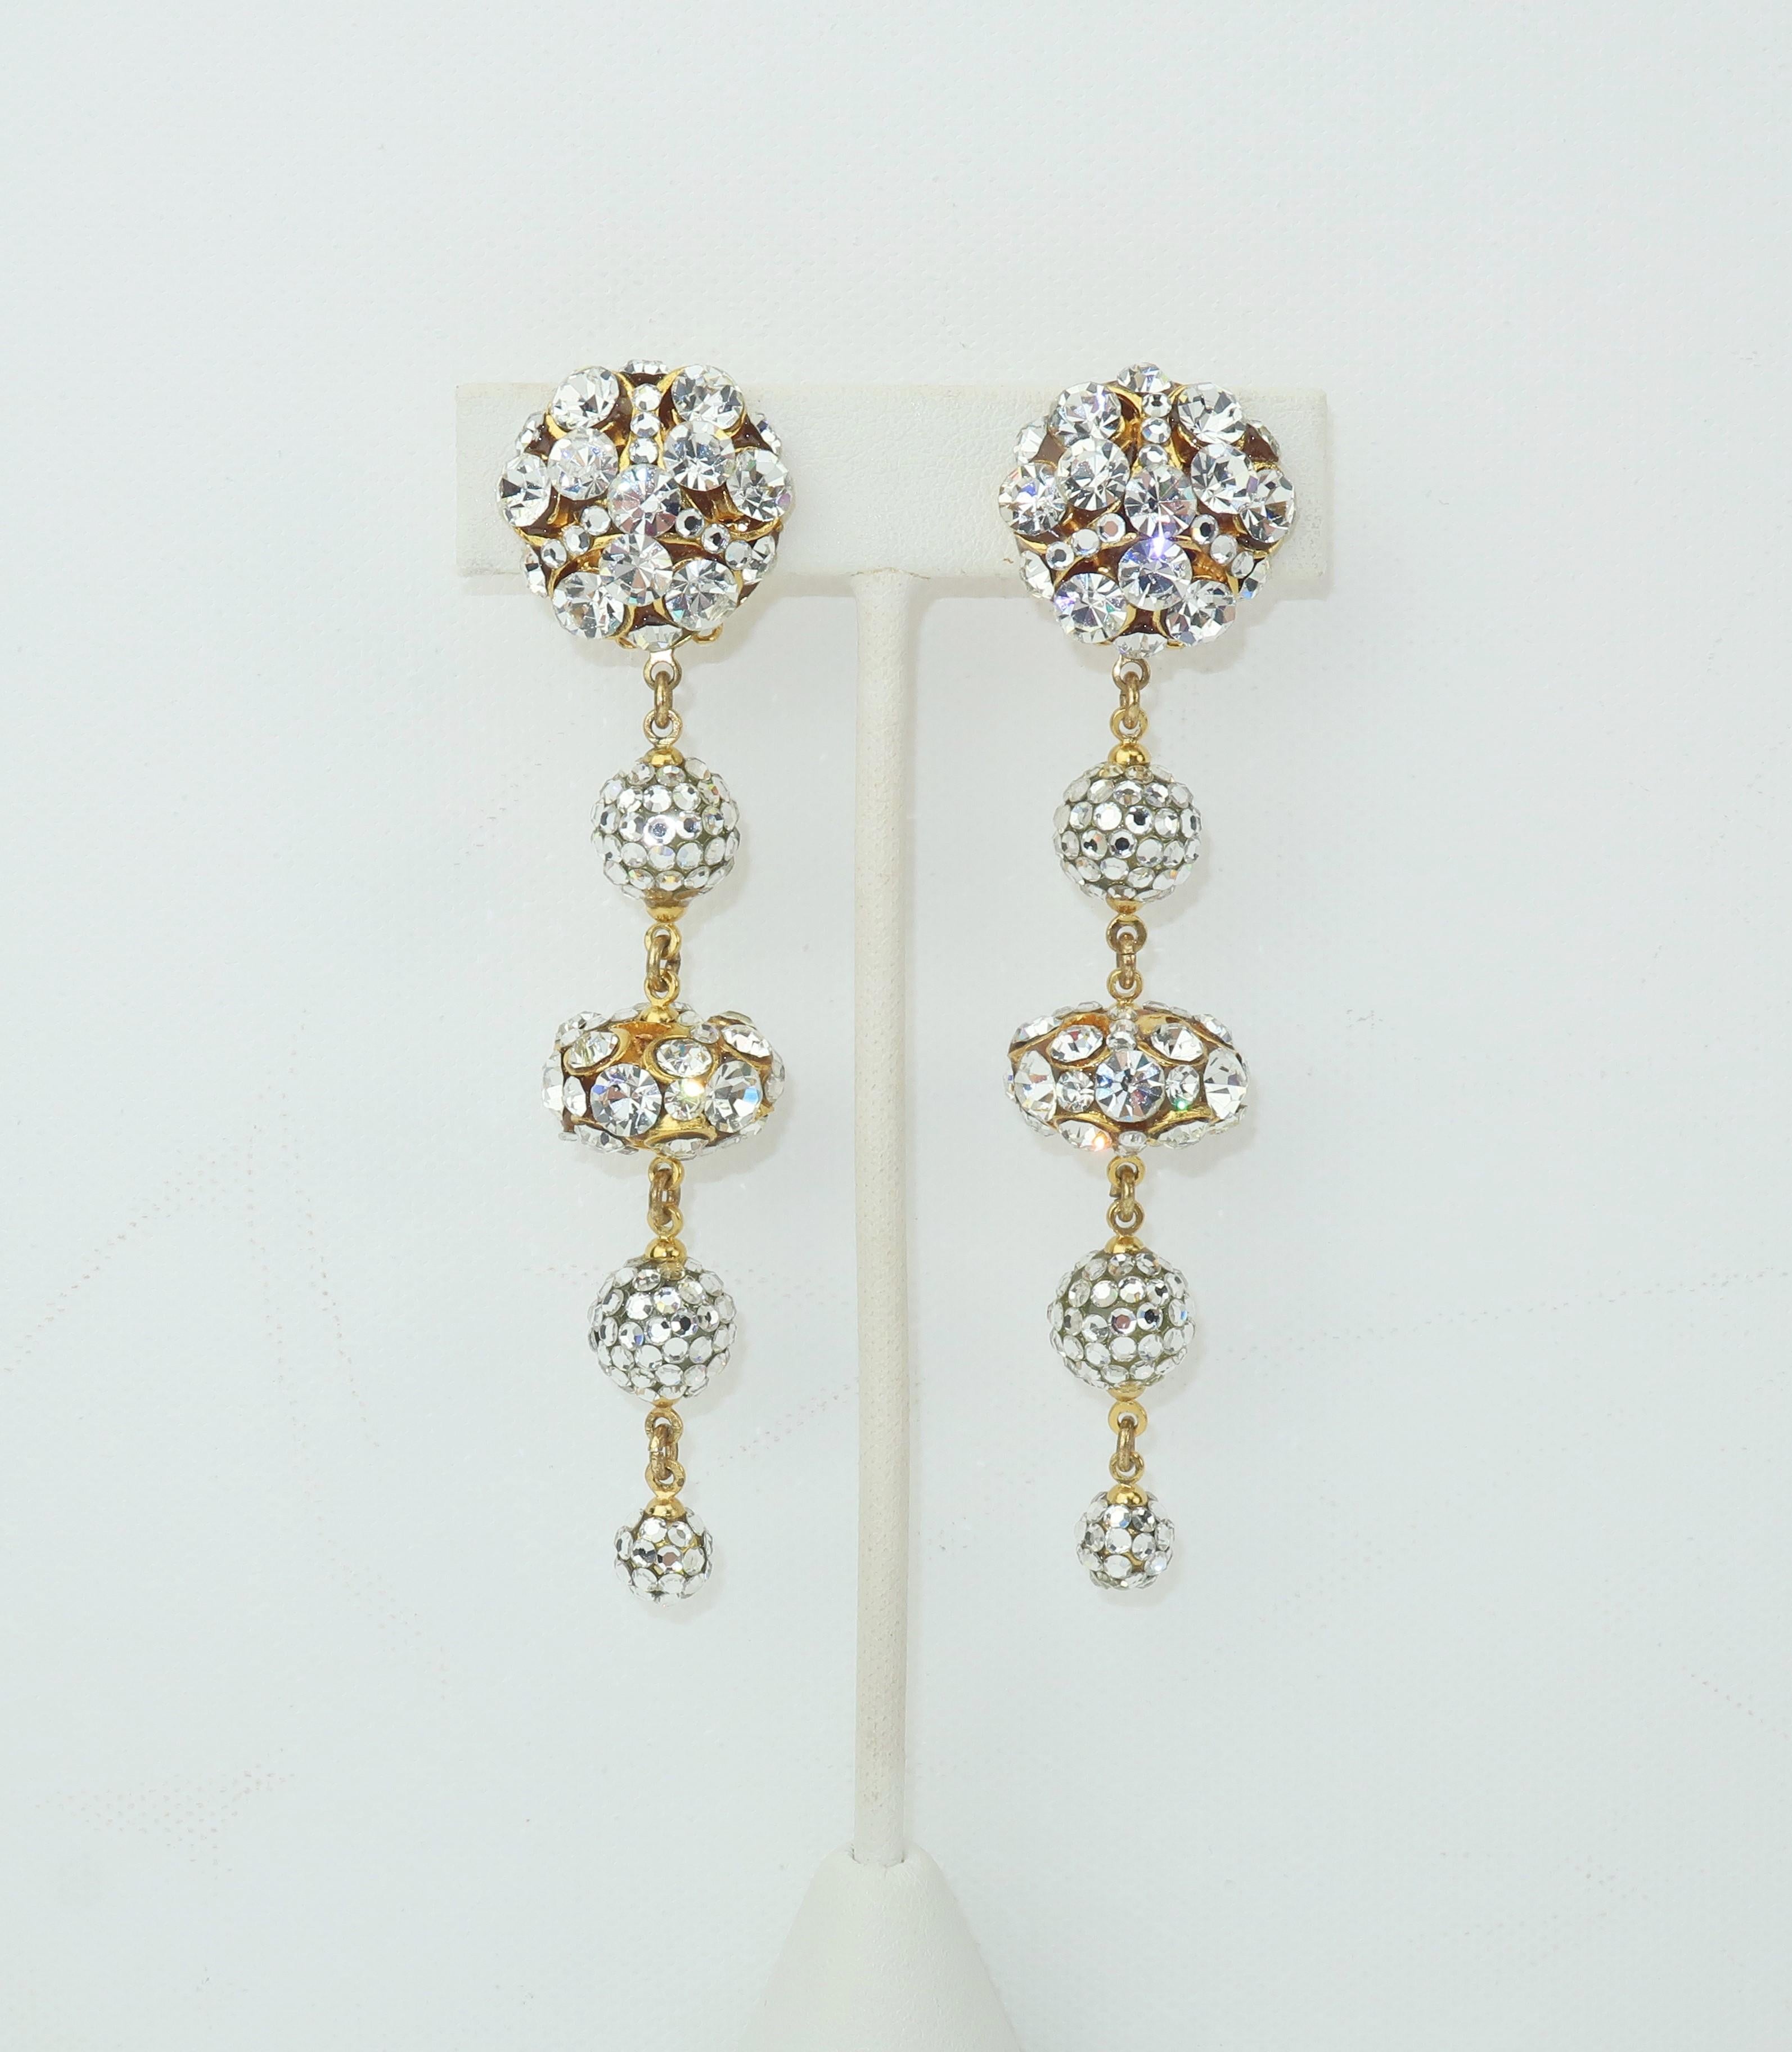 Dazzling and delightful!  These C.1980 clip on gold tone earrings sparkle with dangling orbs embellished by rhinestones and pave crystals.  Beautifully made and in very good condition with the hint of adhesive remnants from old earring pads to the